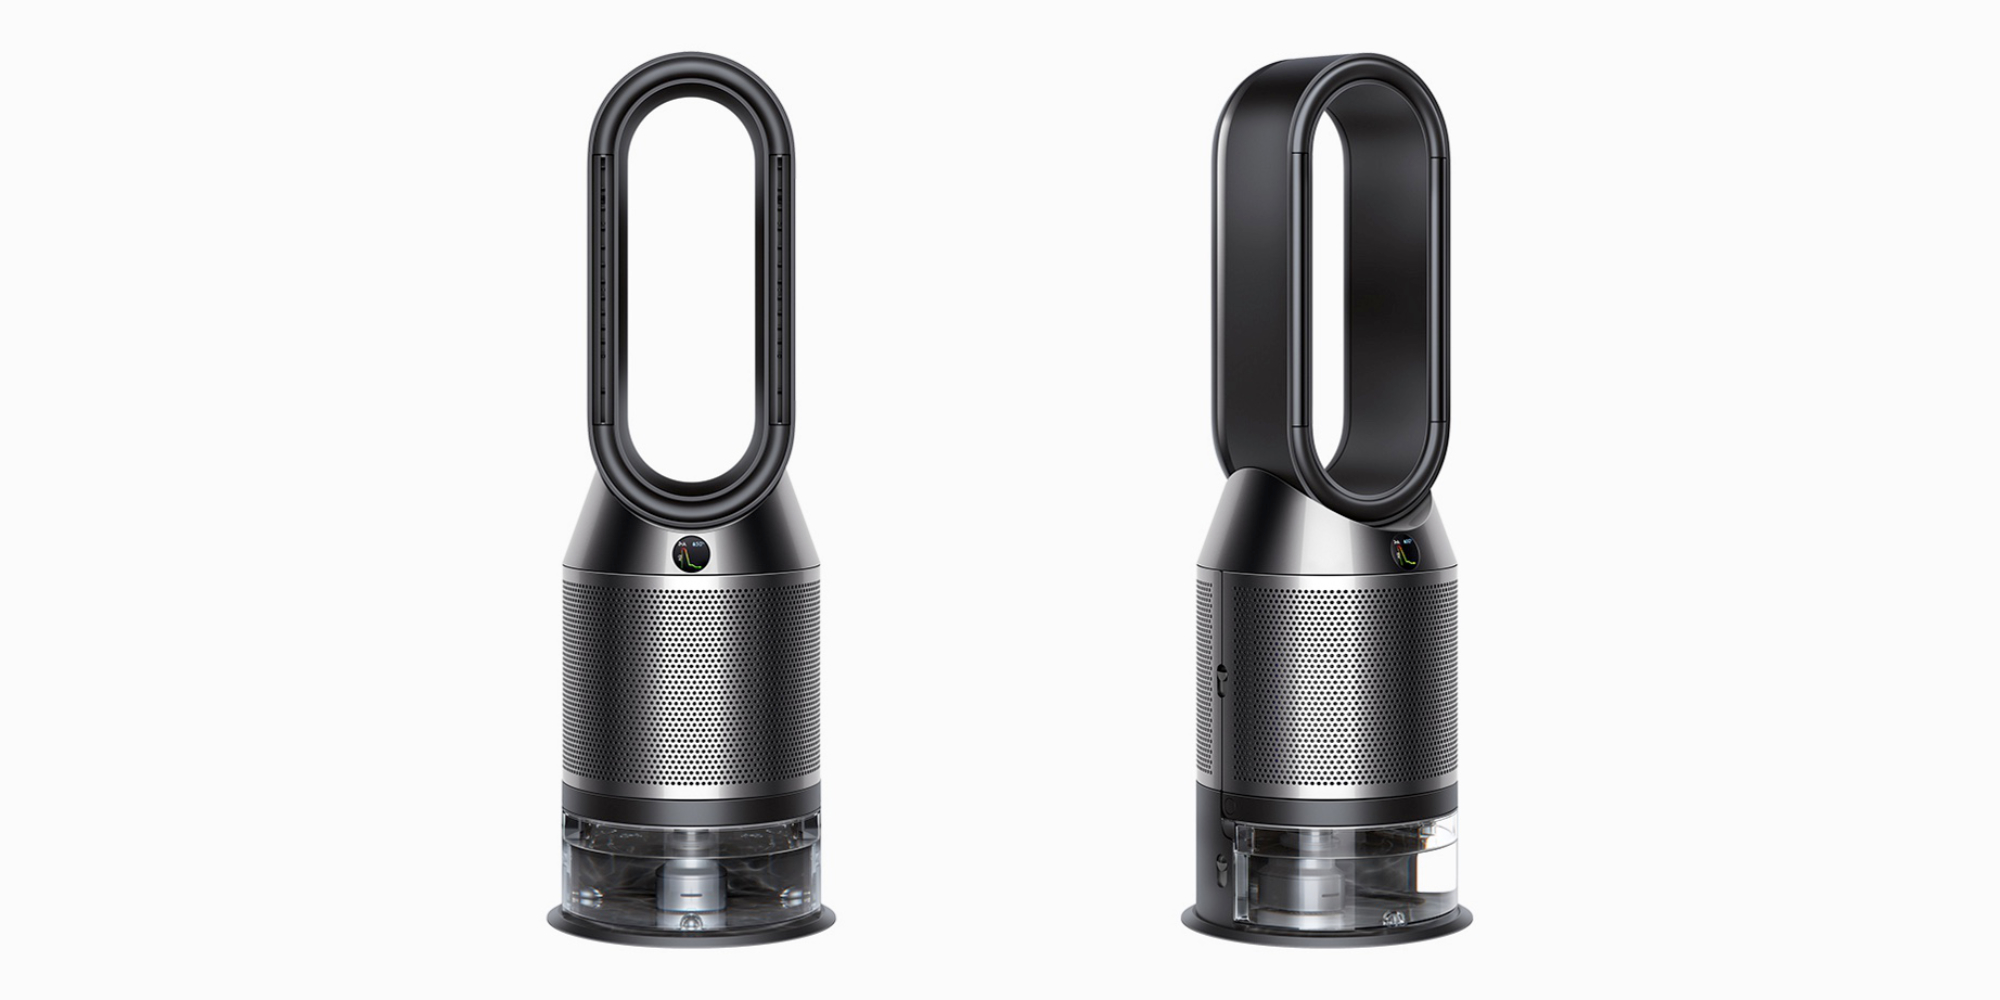 New Dyson Pure Humidify + Cool debuts with self-cleaning tech 